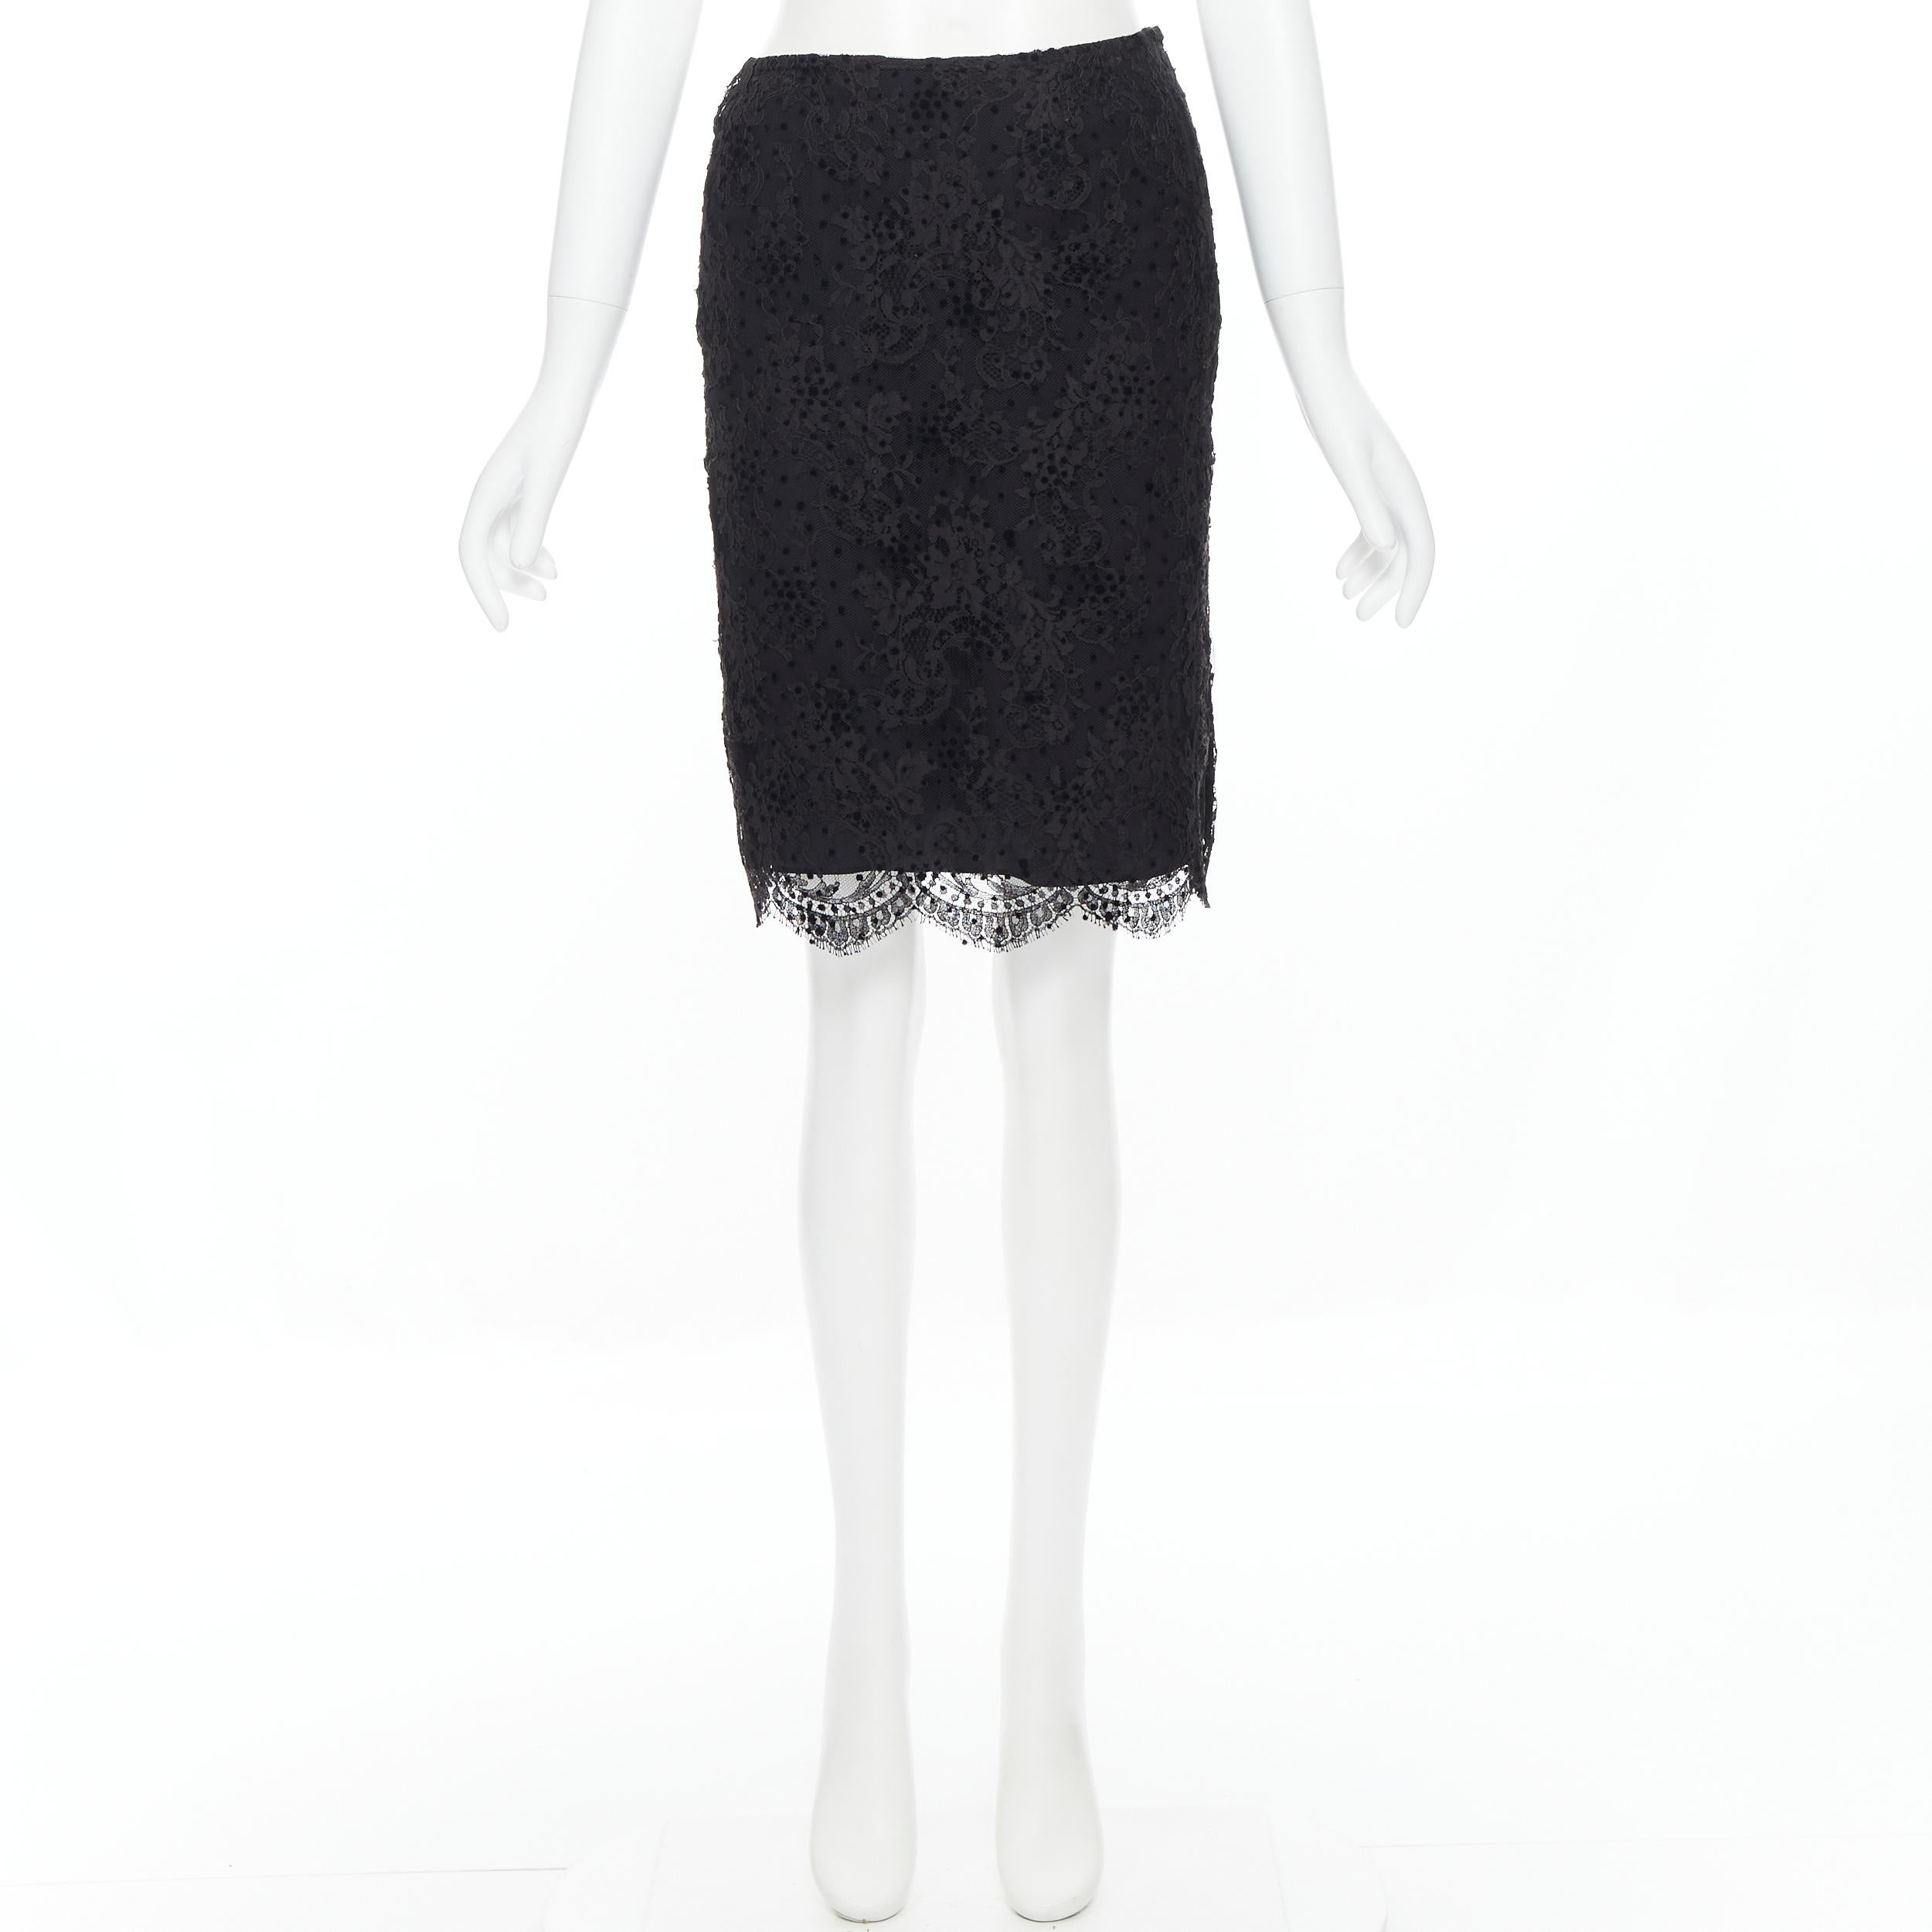 BALENCIAGA 2009 black lace velvet polka dot scalloped hem skirt Fr36 XS 
Reference: LNKO/A01754 
Brand: Balenciaga 
Collection: 2009 
Material: Lace 
Color: Black 
Pattern: Floral 
Closure: Zip 
Extra Detail: Lace with velvet polka dot. Silk lining.